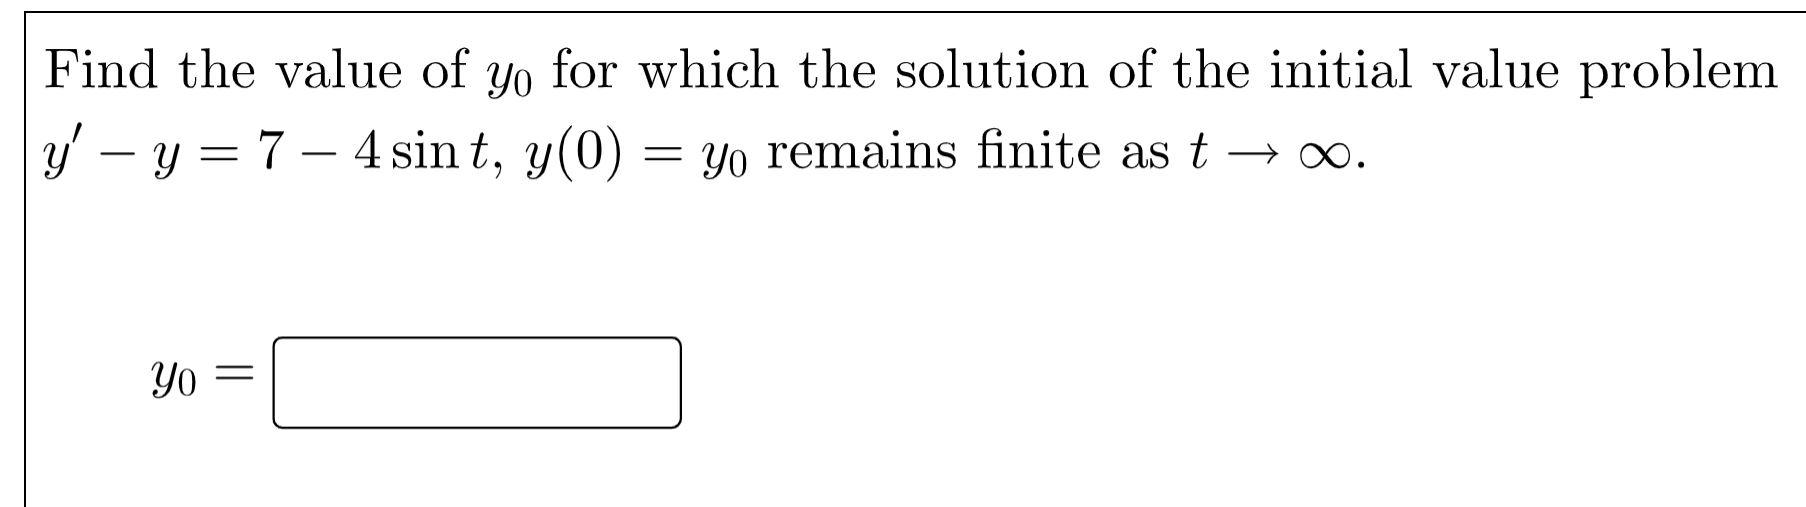 Find The Value Of Yo For Which The Solution Of The Initial Value Problem Y Y 7 4 Sint Y 0 Yo Remains Finite A 1